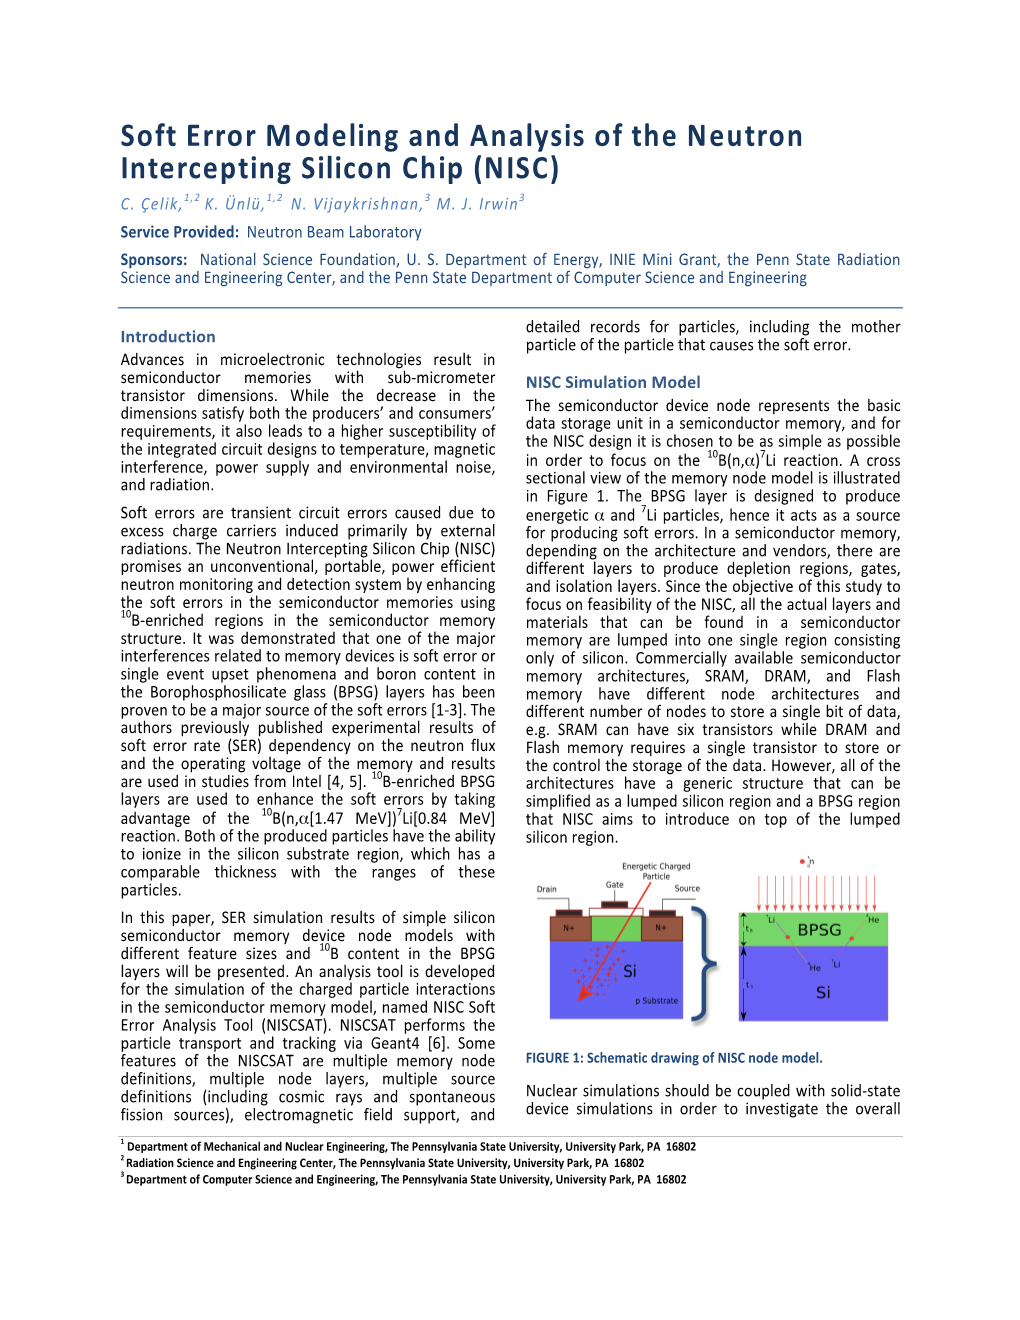 Soft Error Modeling and Analysis of the Neutron Intercepting Silicon Chip (NISC) C